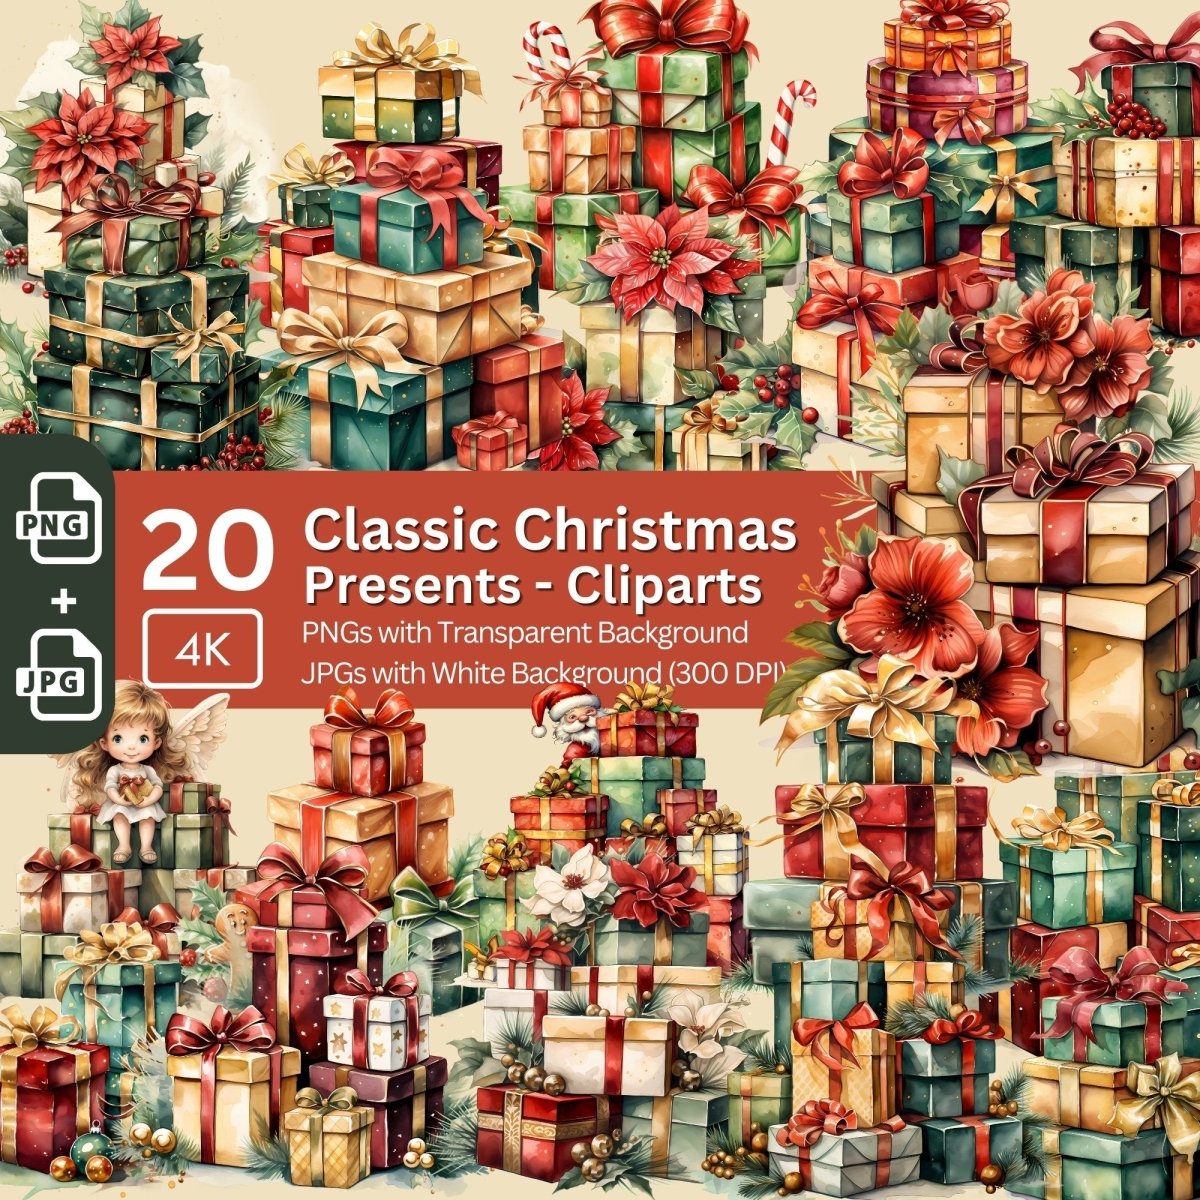 Classic Christmas Presents Cliparts 20x PNG Bundle Festive Advent Clipart Card Making Digital Paper Craft Holiday Junk Journal Kit - Everything Pixel